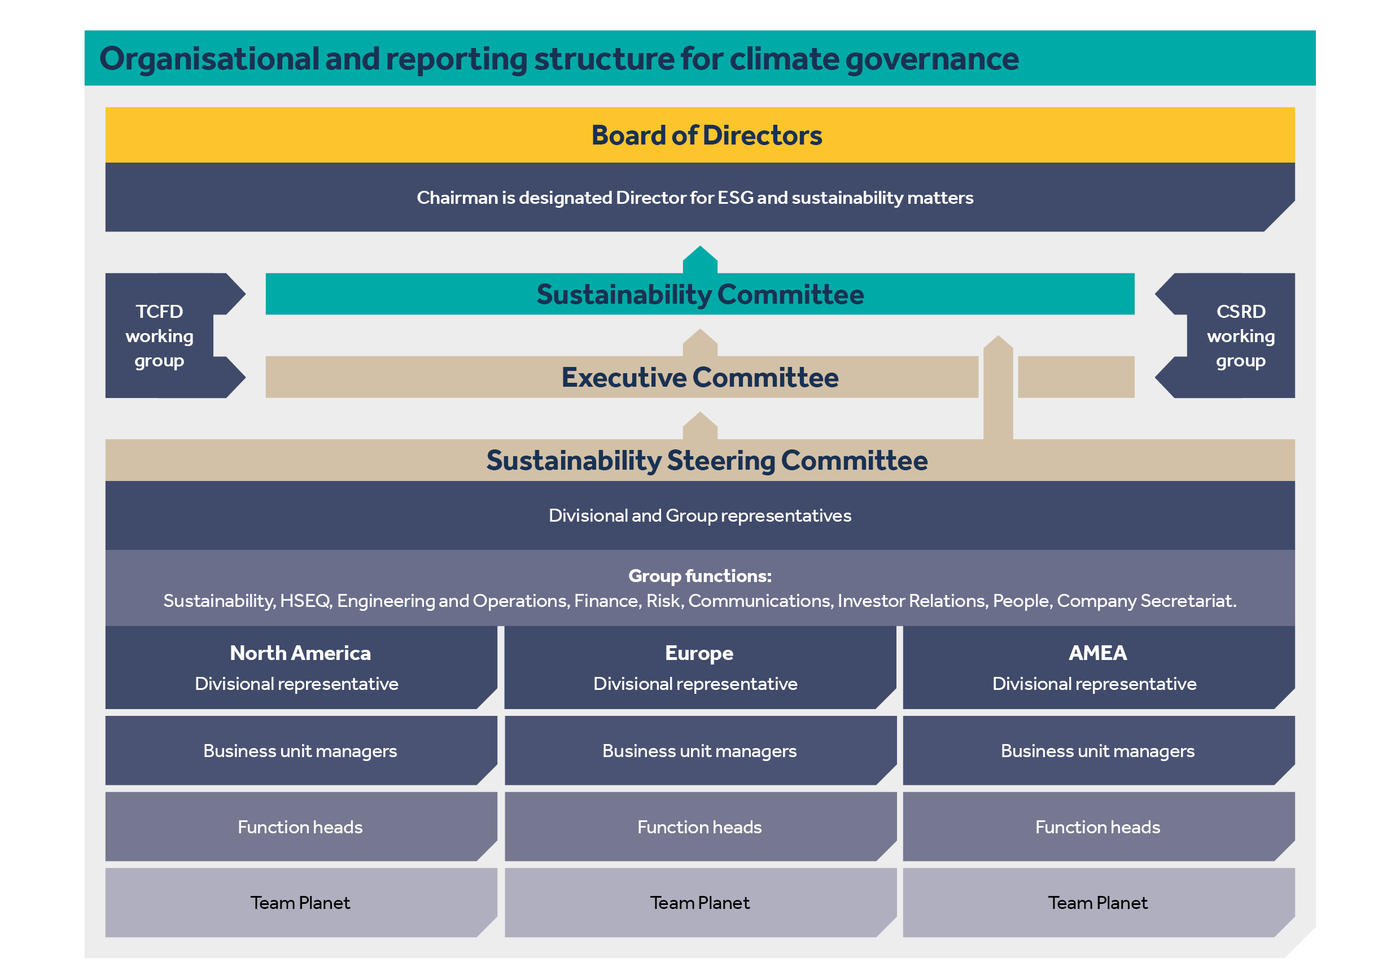 Keller organisational and reporting structure for climate governance